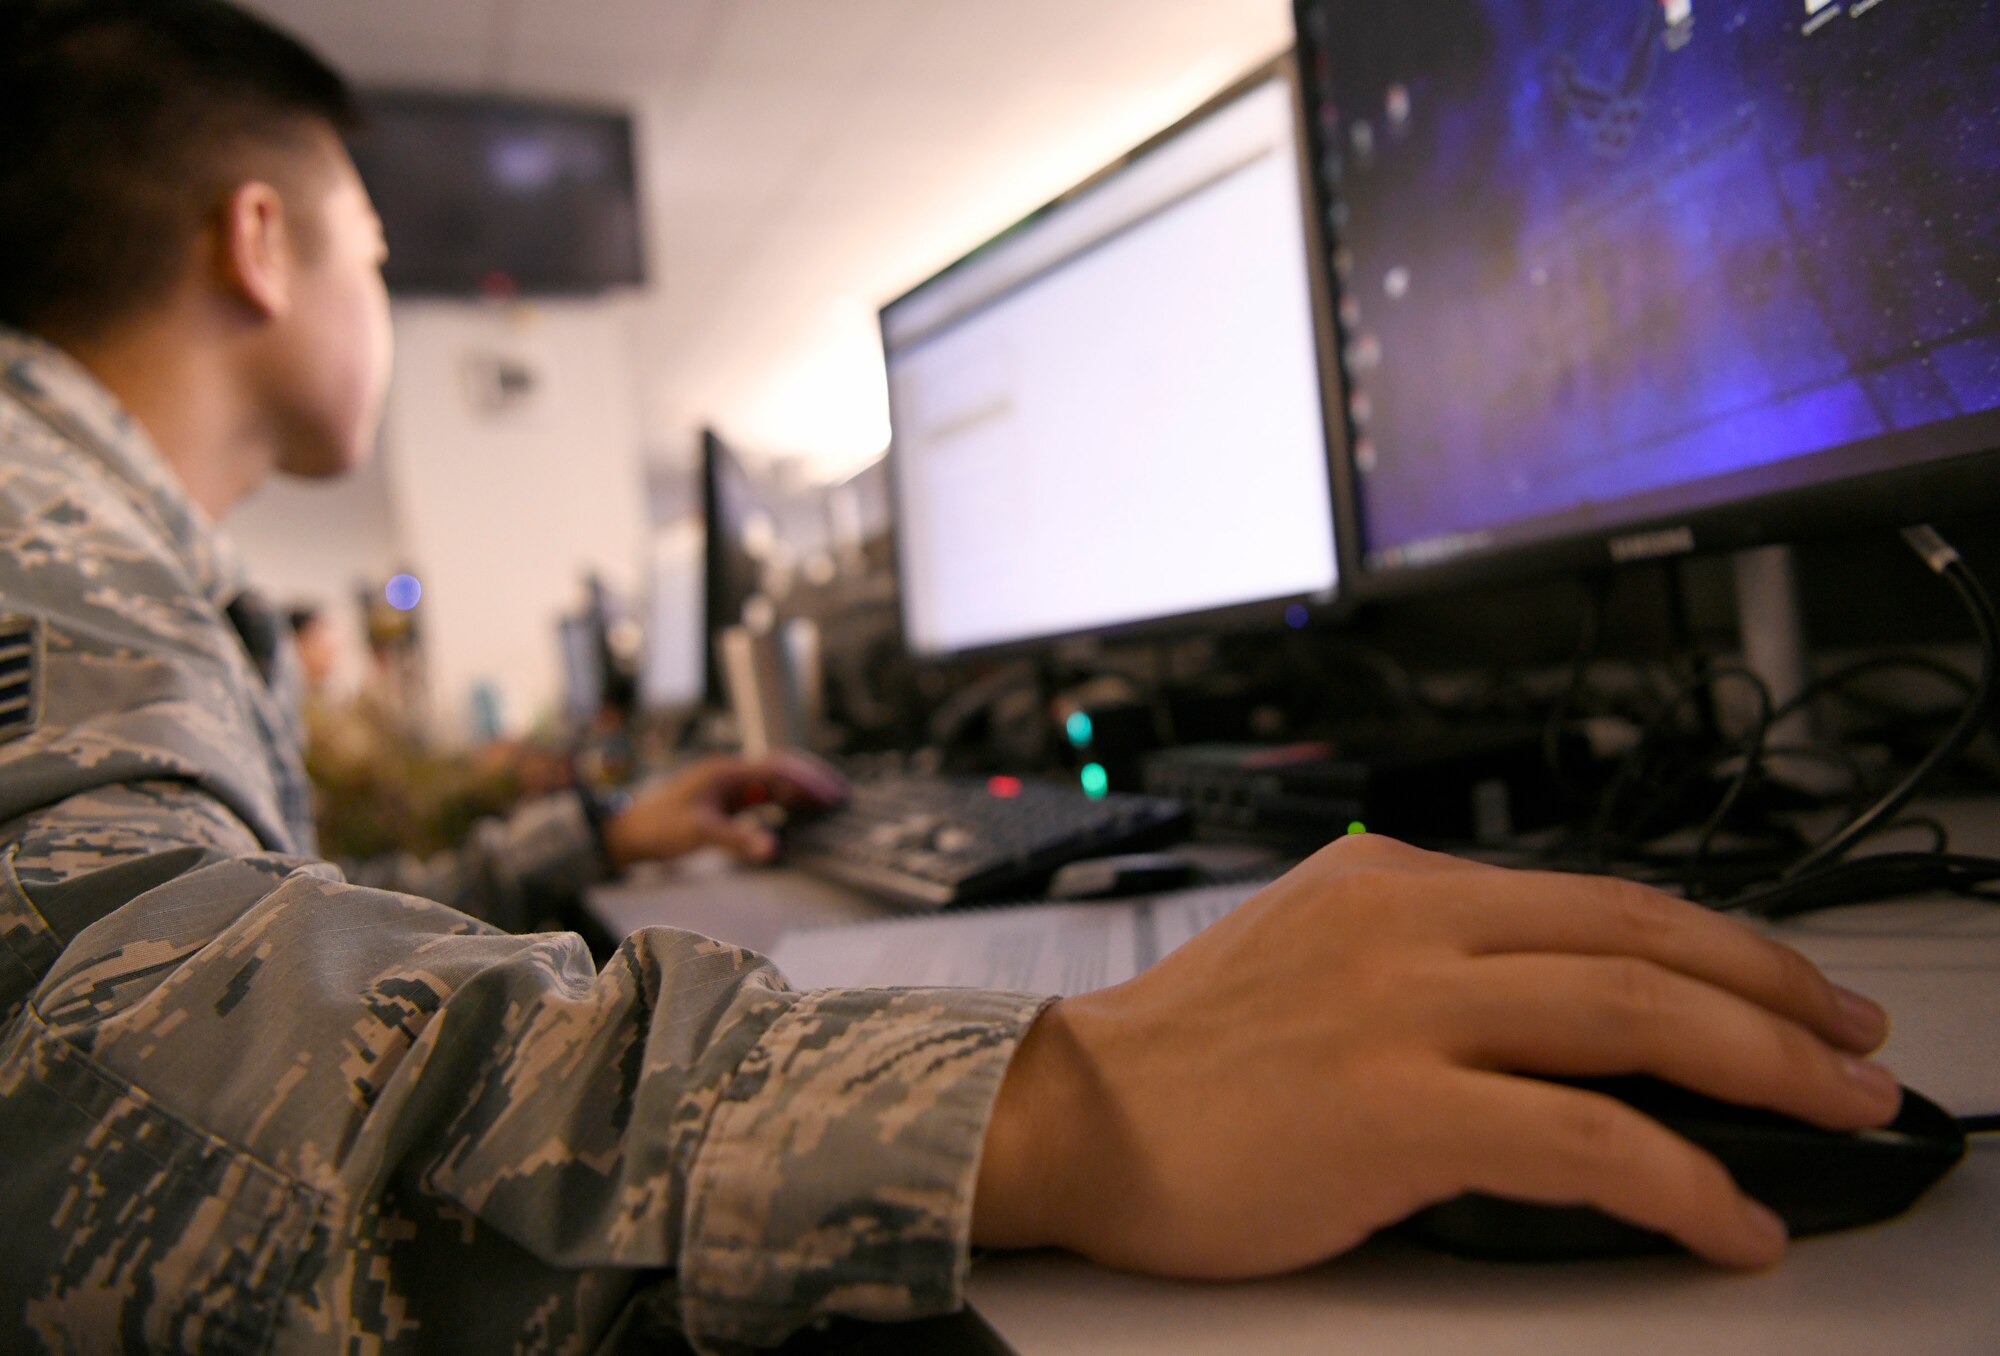 A U.S. Air Force Airman from the 33rd Network Warfare Squadron, conducts cyber operations at Joint Base San Antonio-Lackland, Texas, Aug. 27, 2019. Airmen from the 33rd NWS utilize a cyber weapon system that employs more than 40 tools and applications. The “12N12” initiative aims to reduce this number to 12 in 12 months. (U.S. Air Force photo by Tech. Sgt. R.J. Biermann)